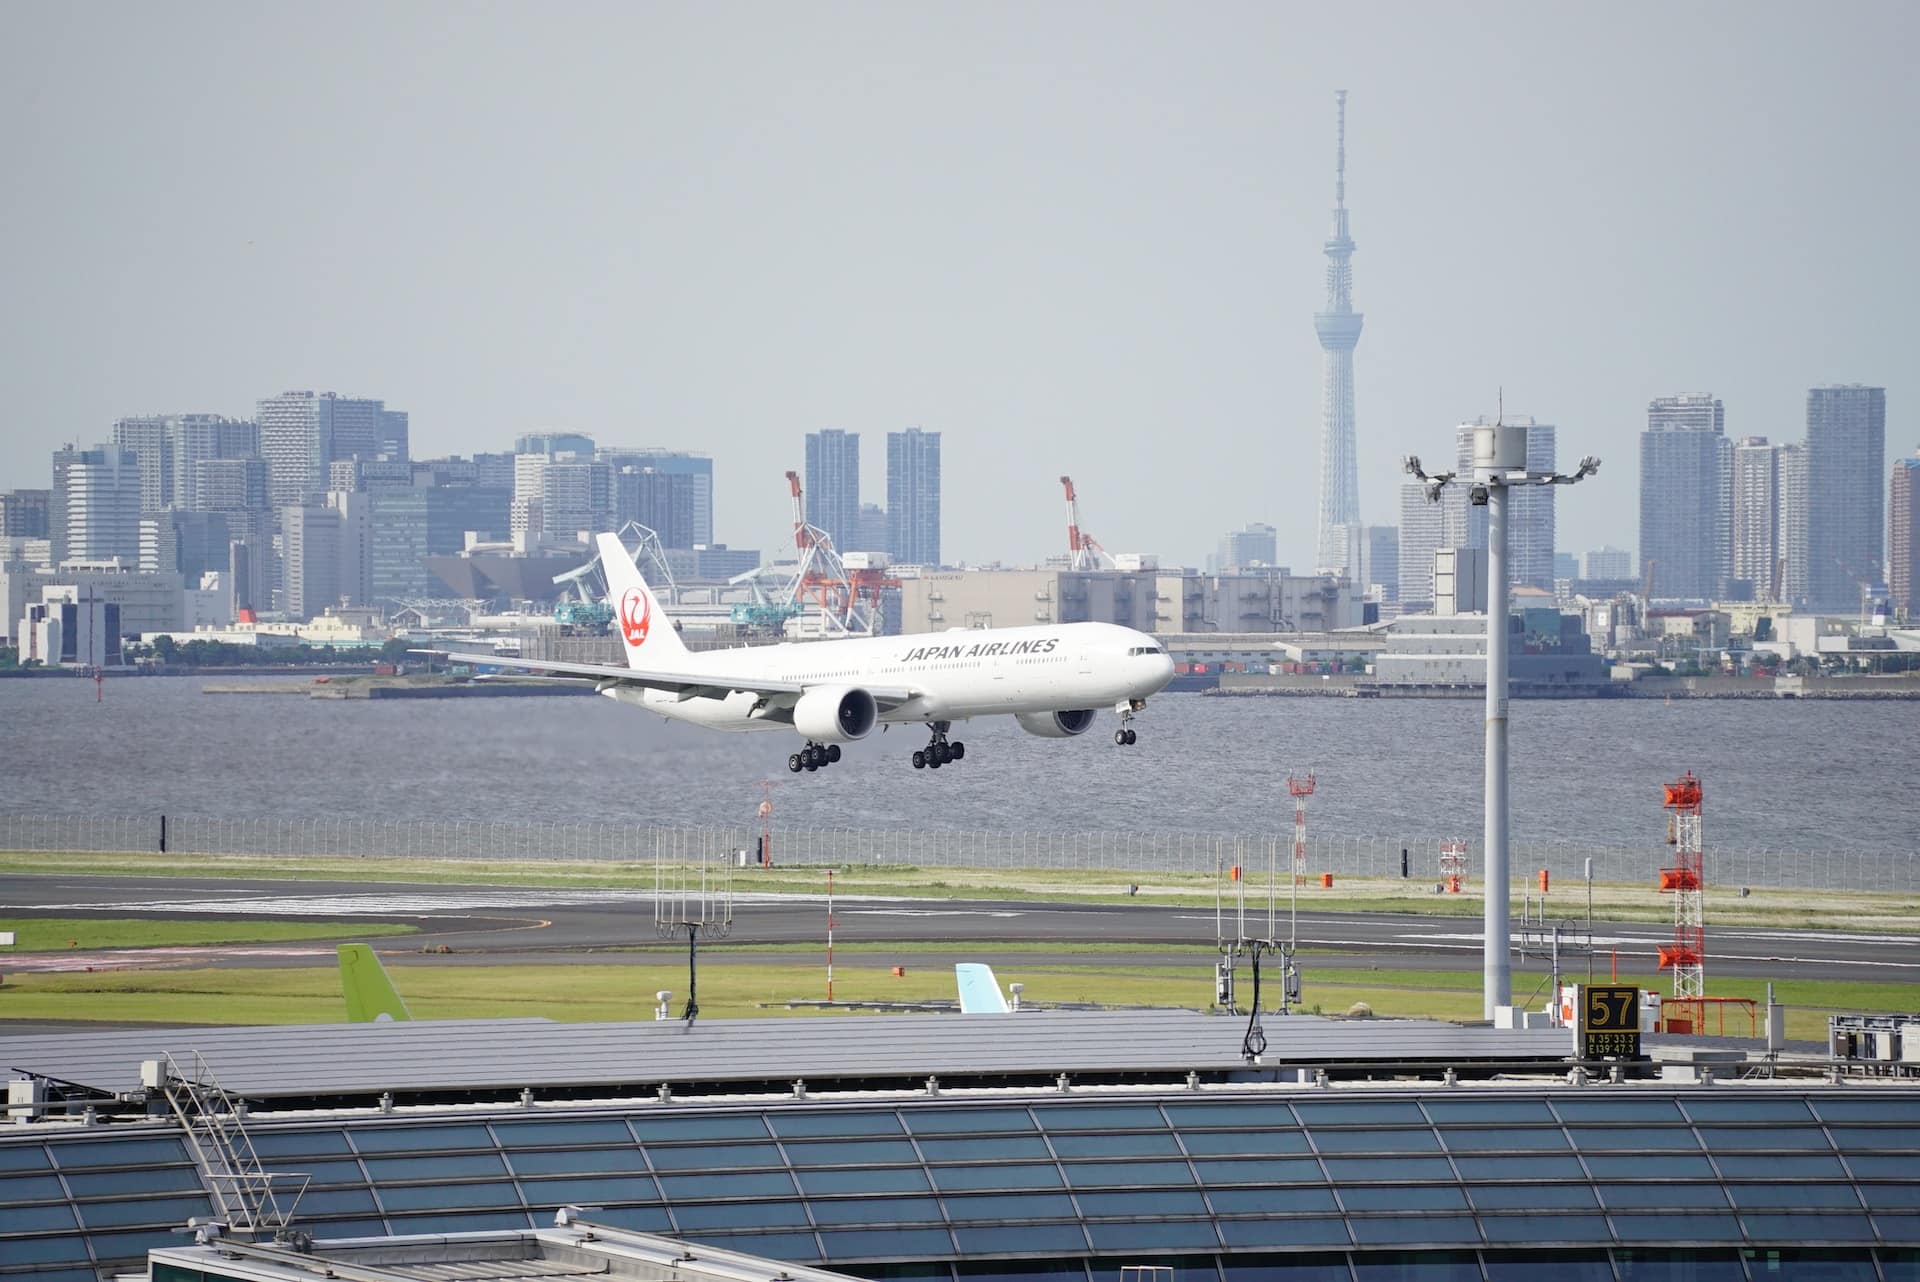 Home to Haneda Airport, Ota Ward serves as the gateway to Tokyo for many international visitors.